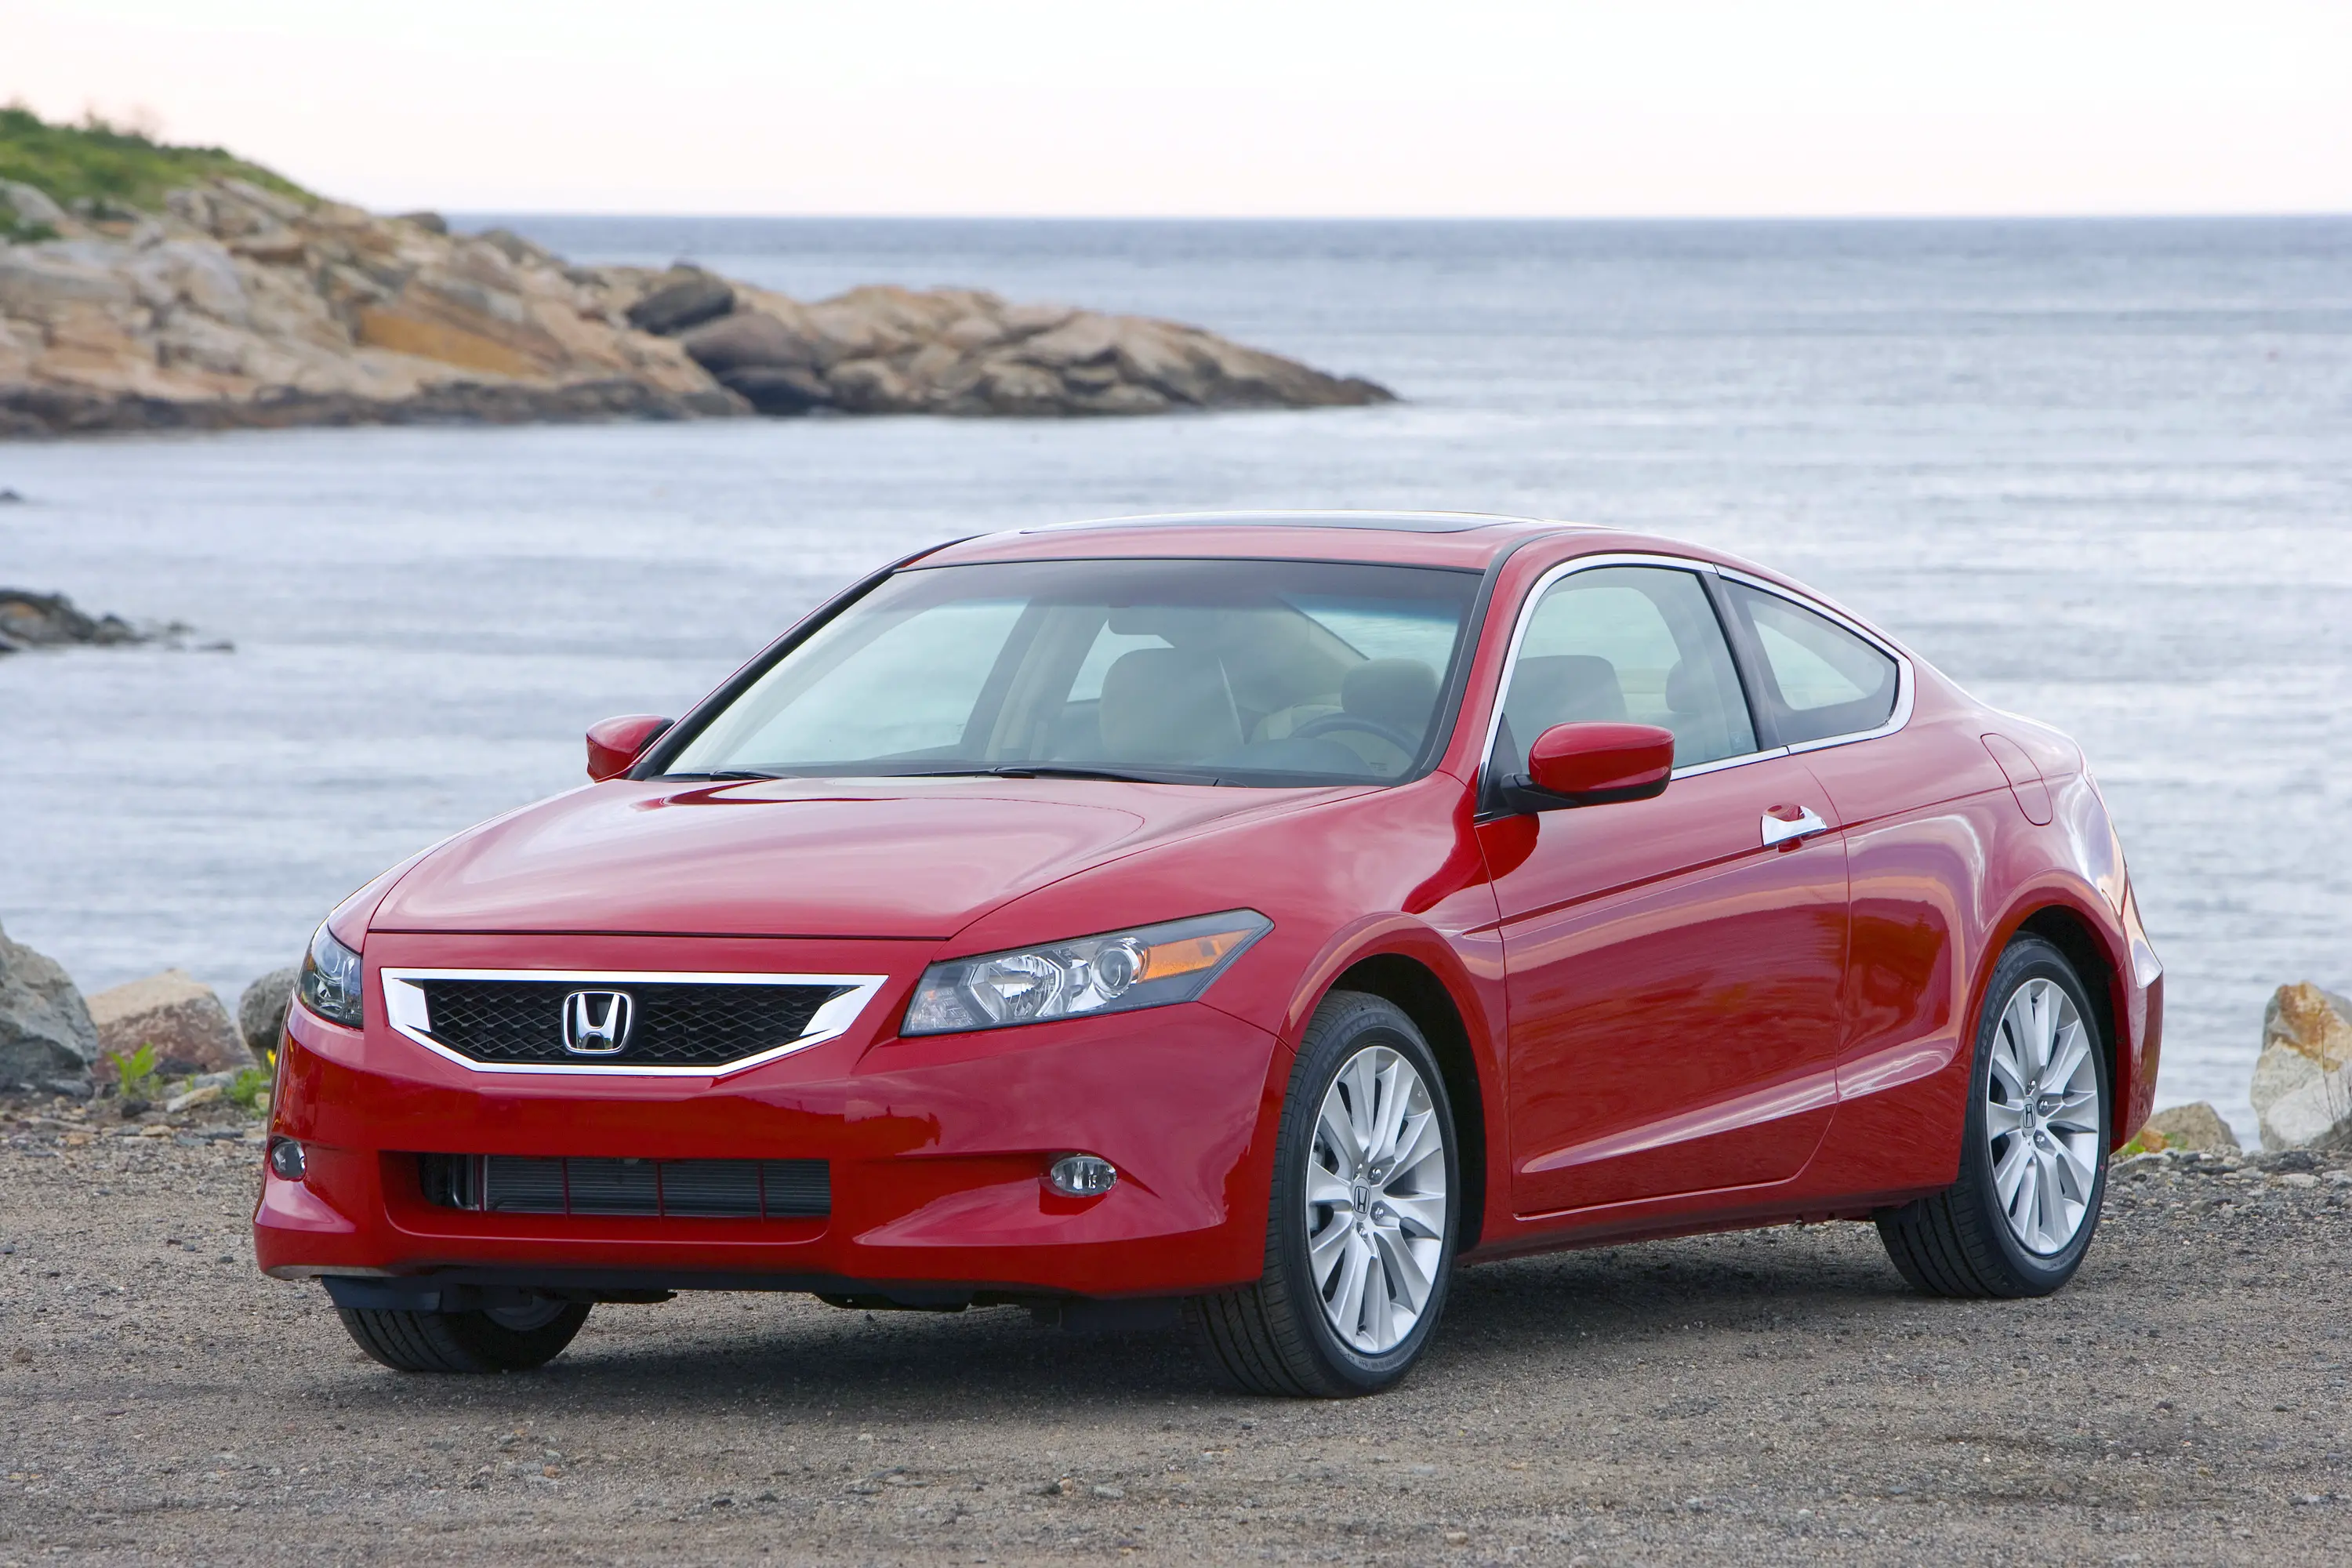 2009 Honda Accord Sets the Pace with Style, Power and Efficiency